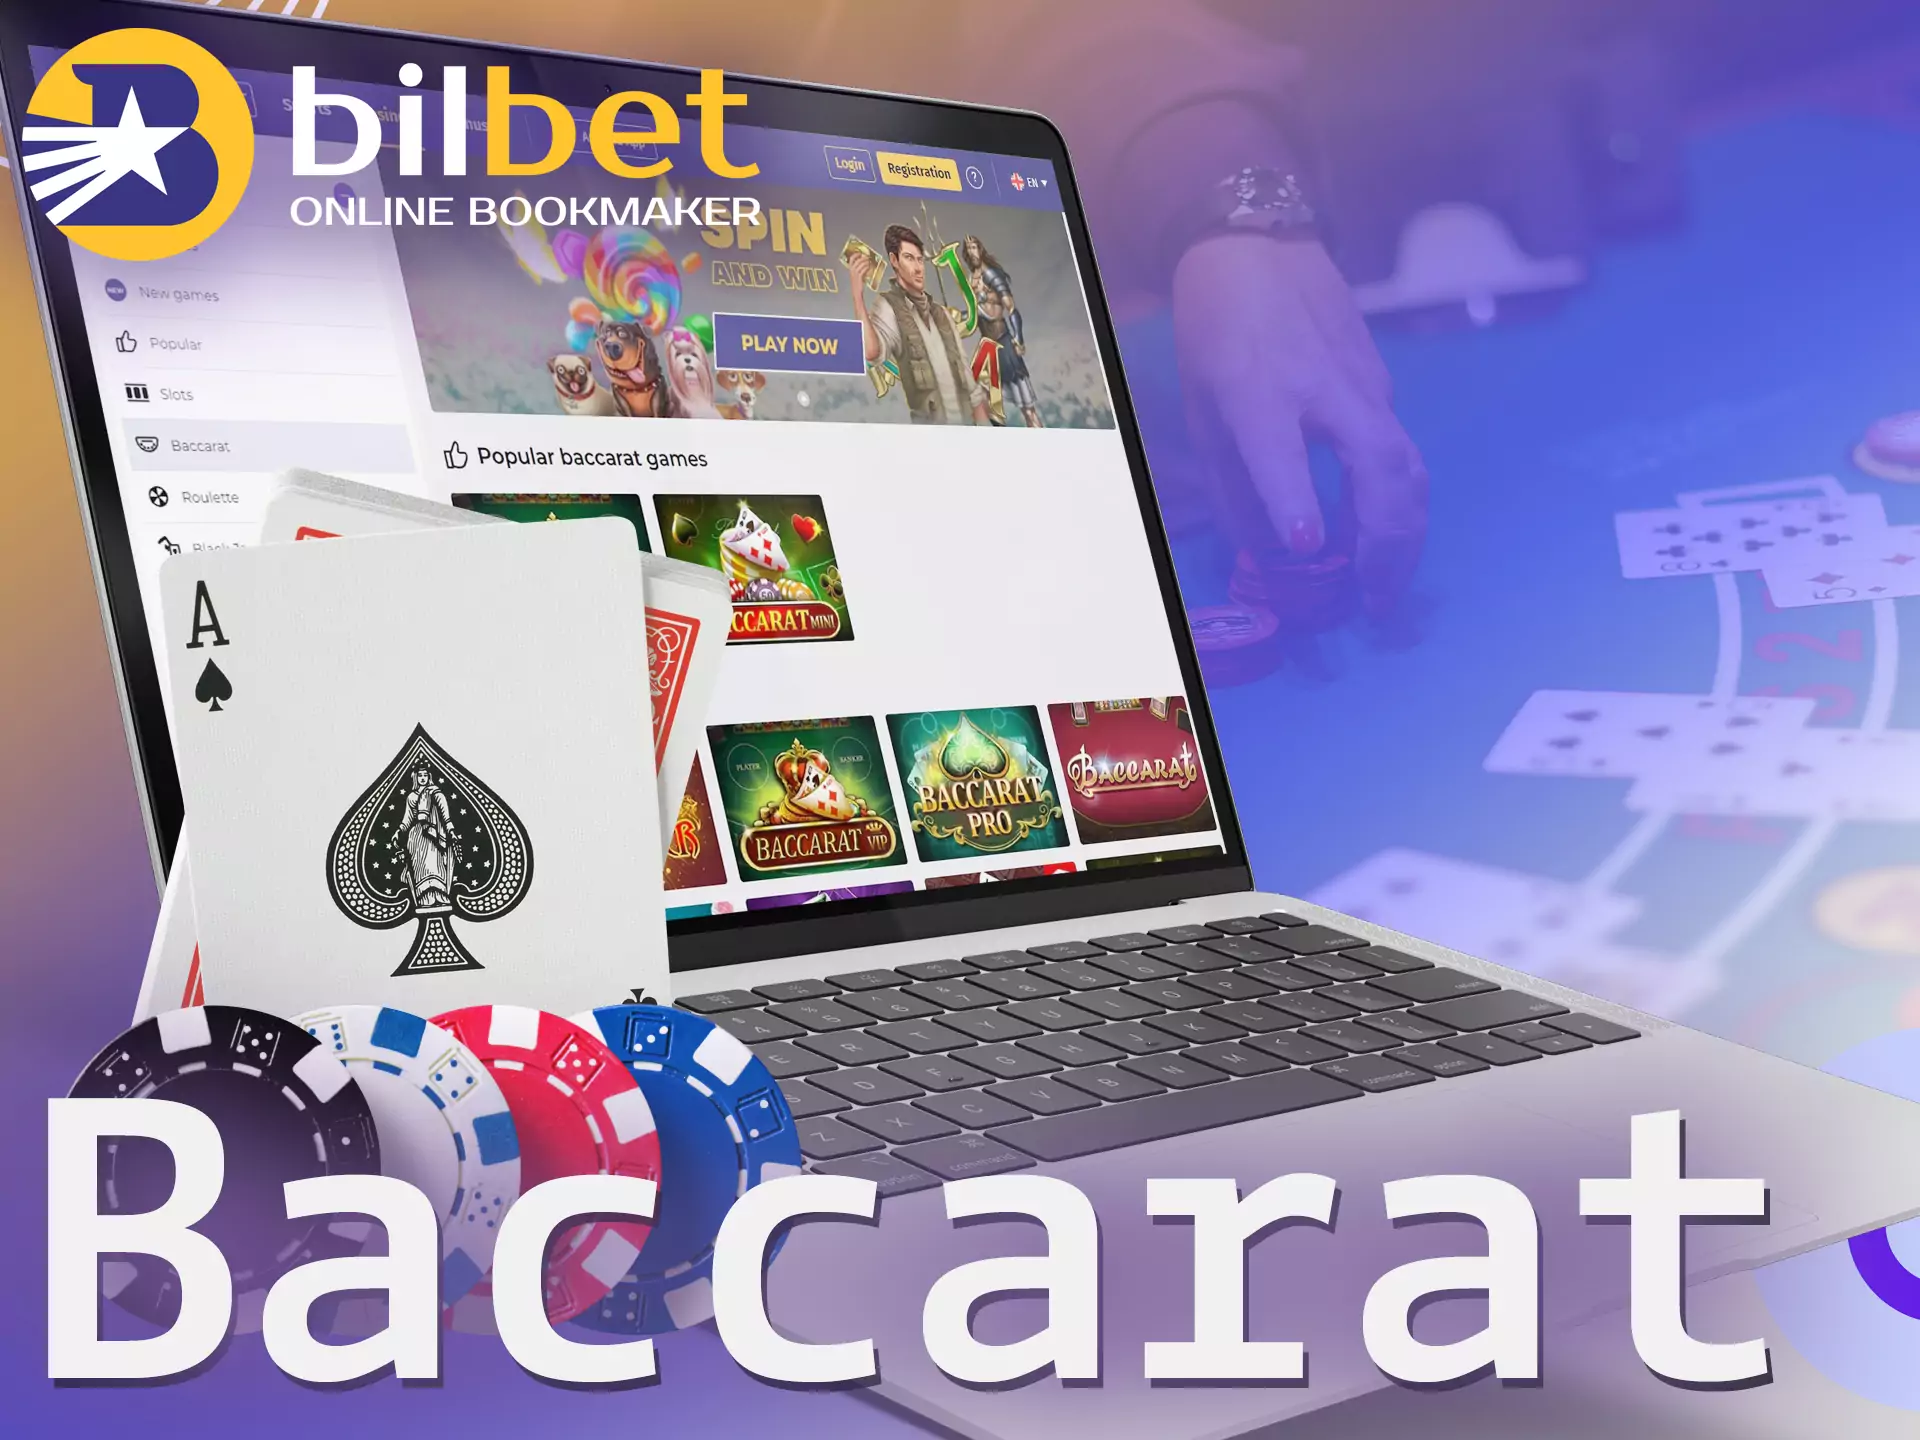 In the Bilbet Casino, you can play a baccarat.